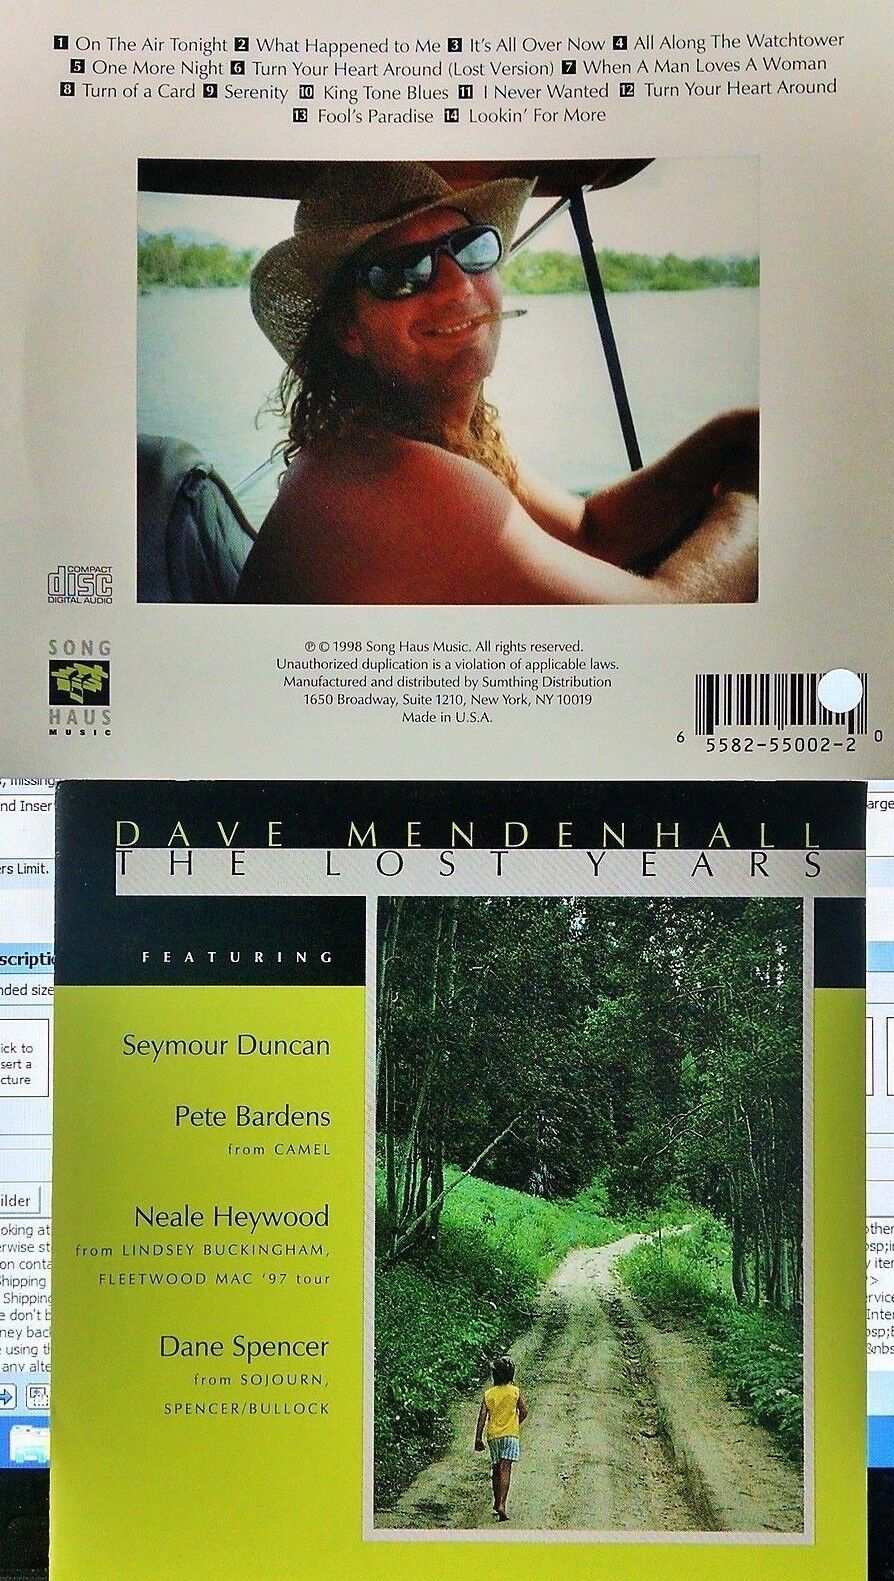 Dave Mendenhall - The Lost Years - CD - Brand New - Seymour Duncan Pete Bardens